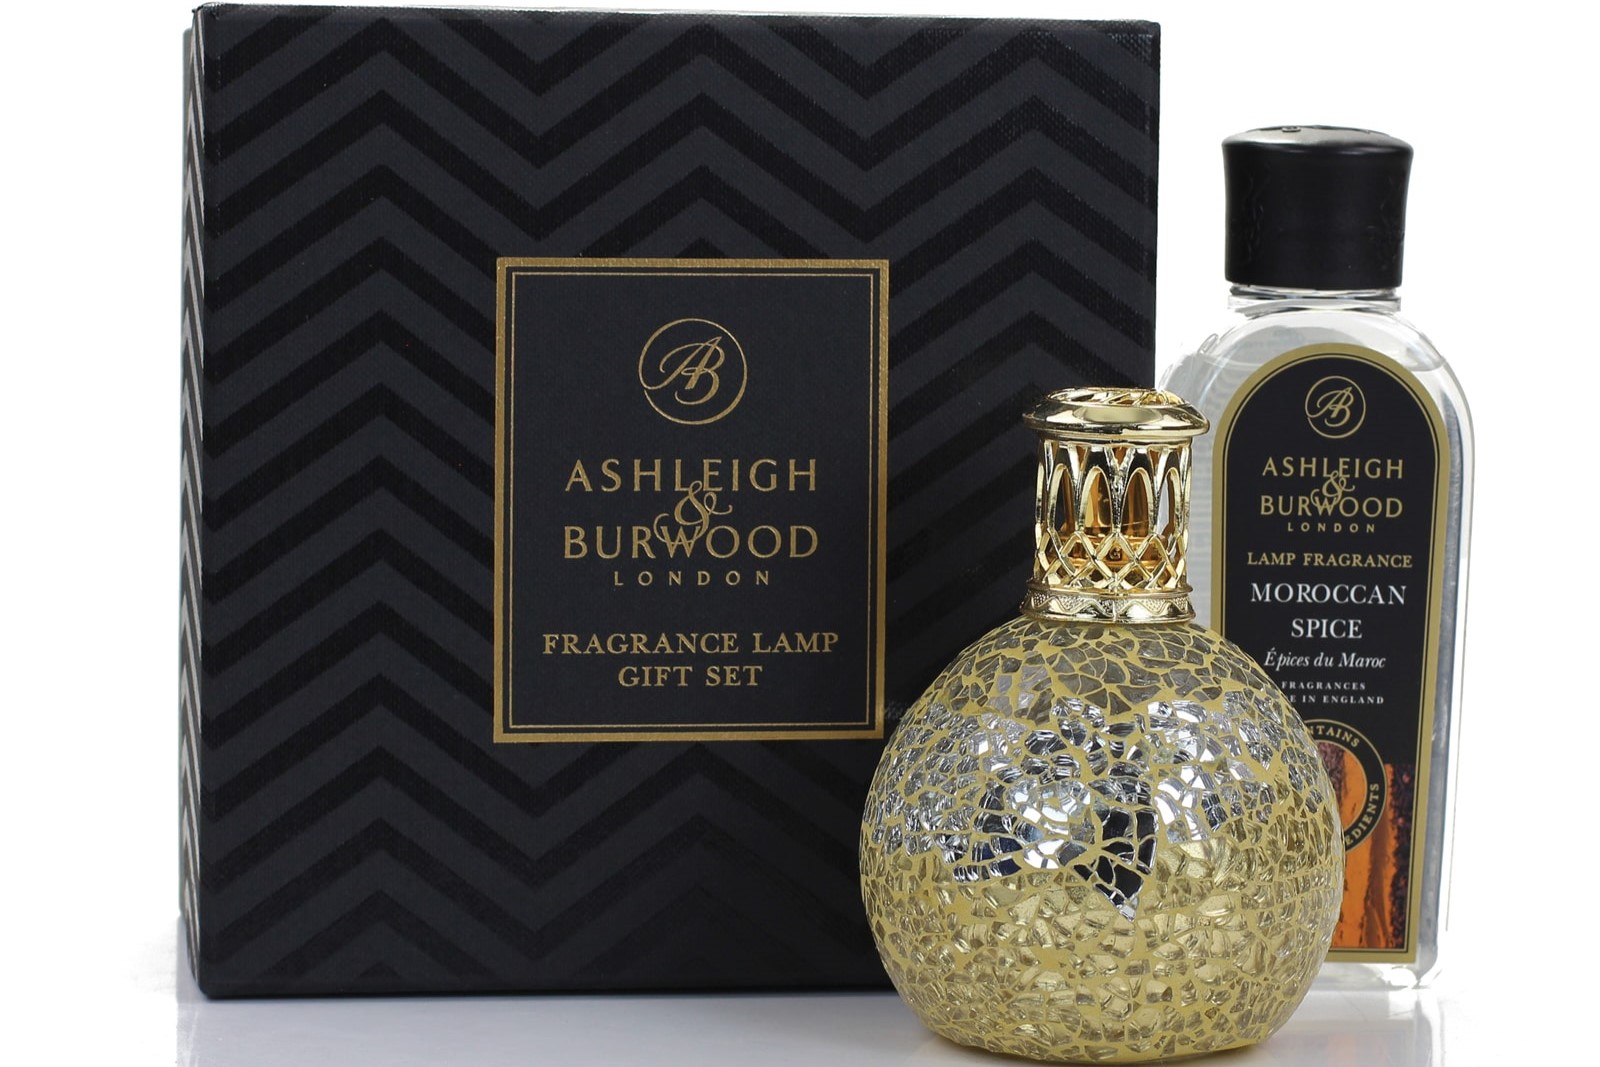 Treat yourself this Christmas with Ashleigh and Burwood